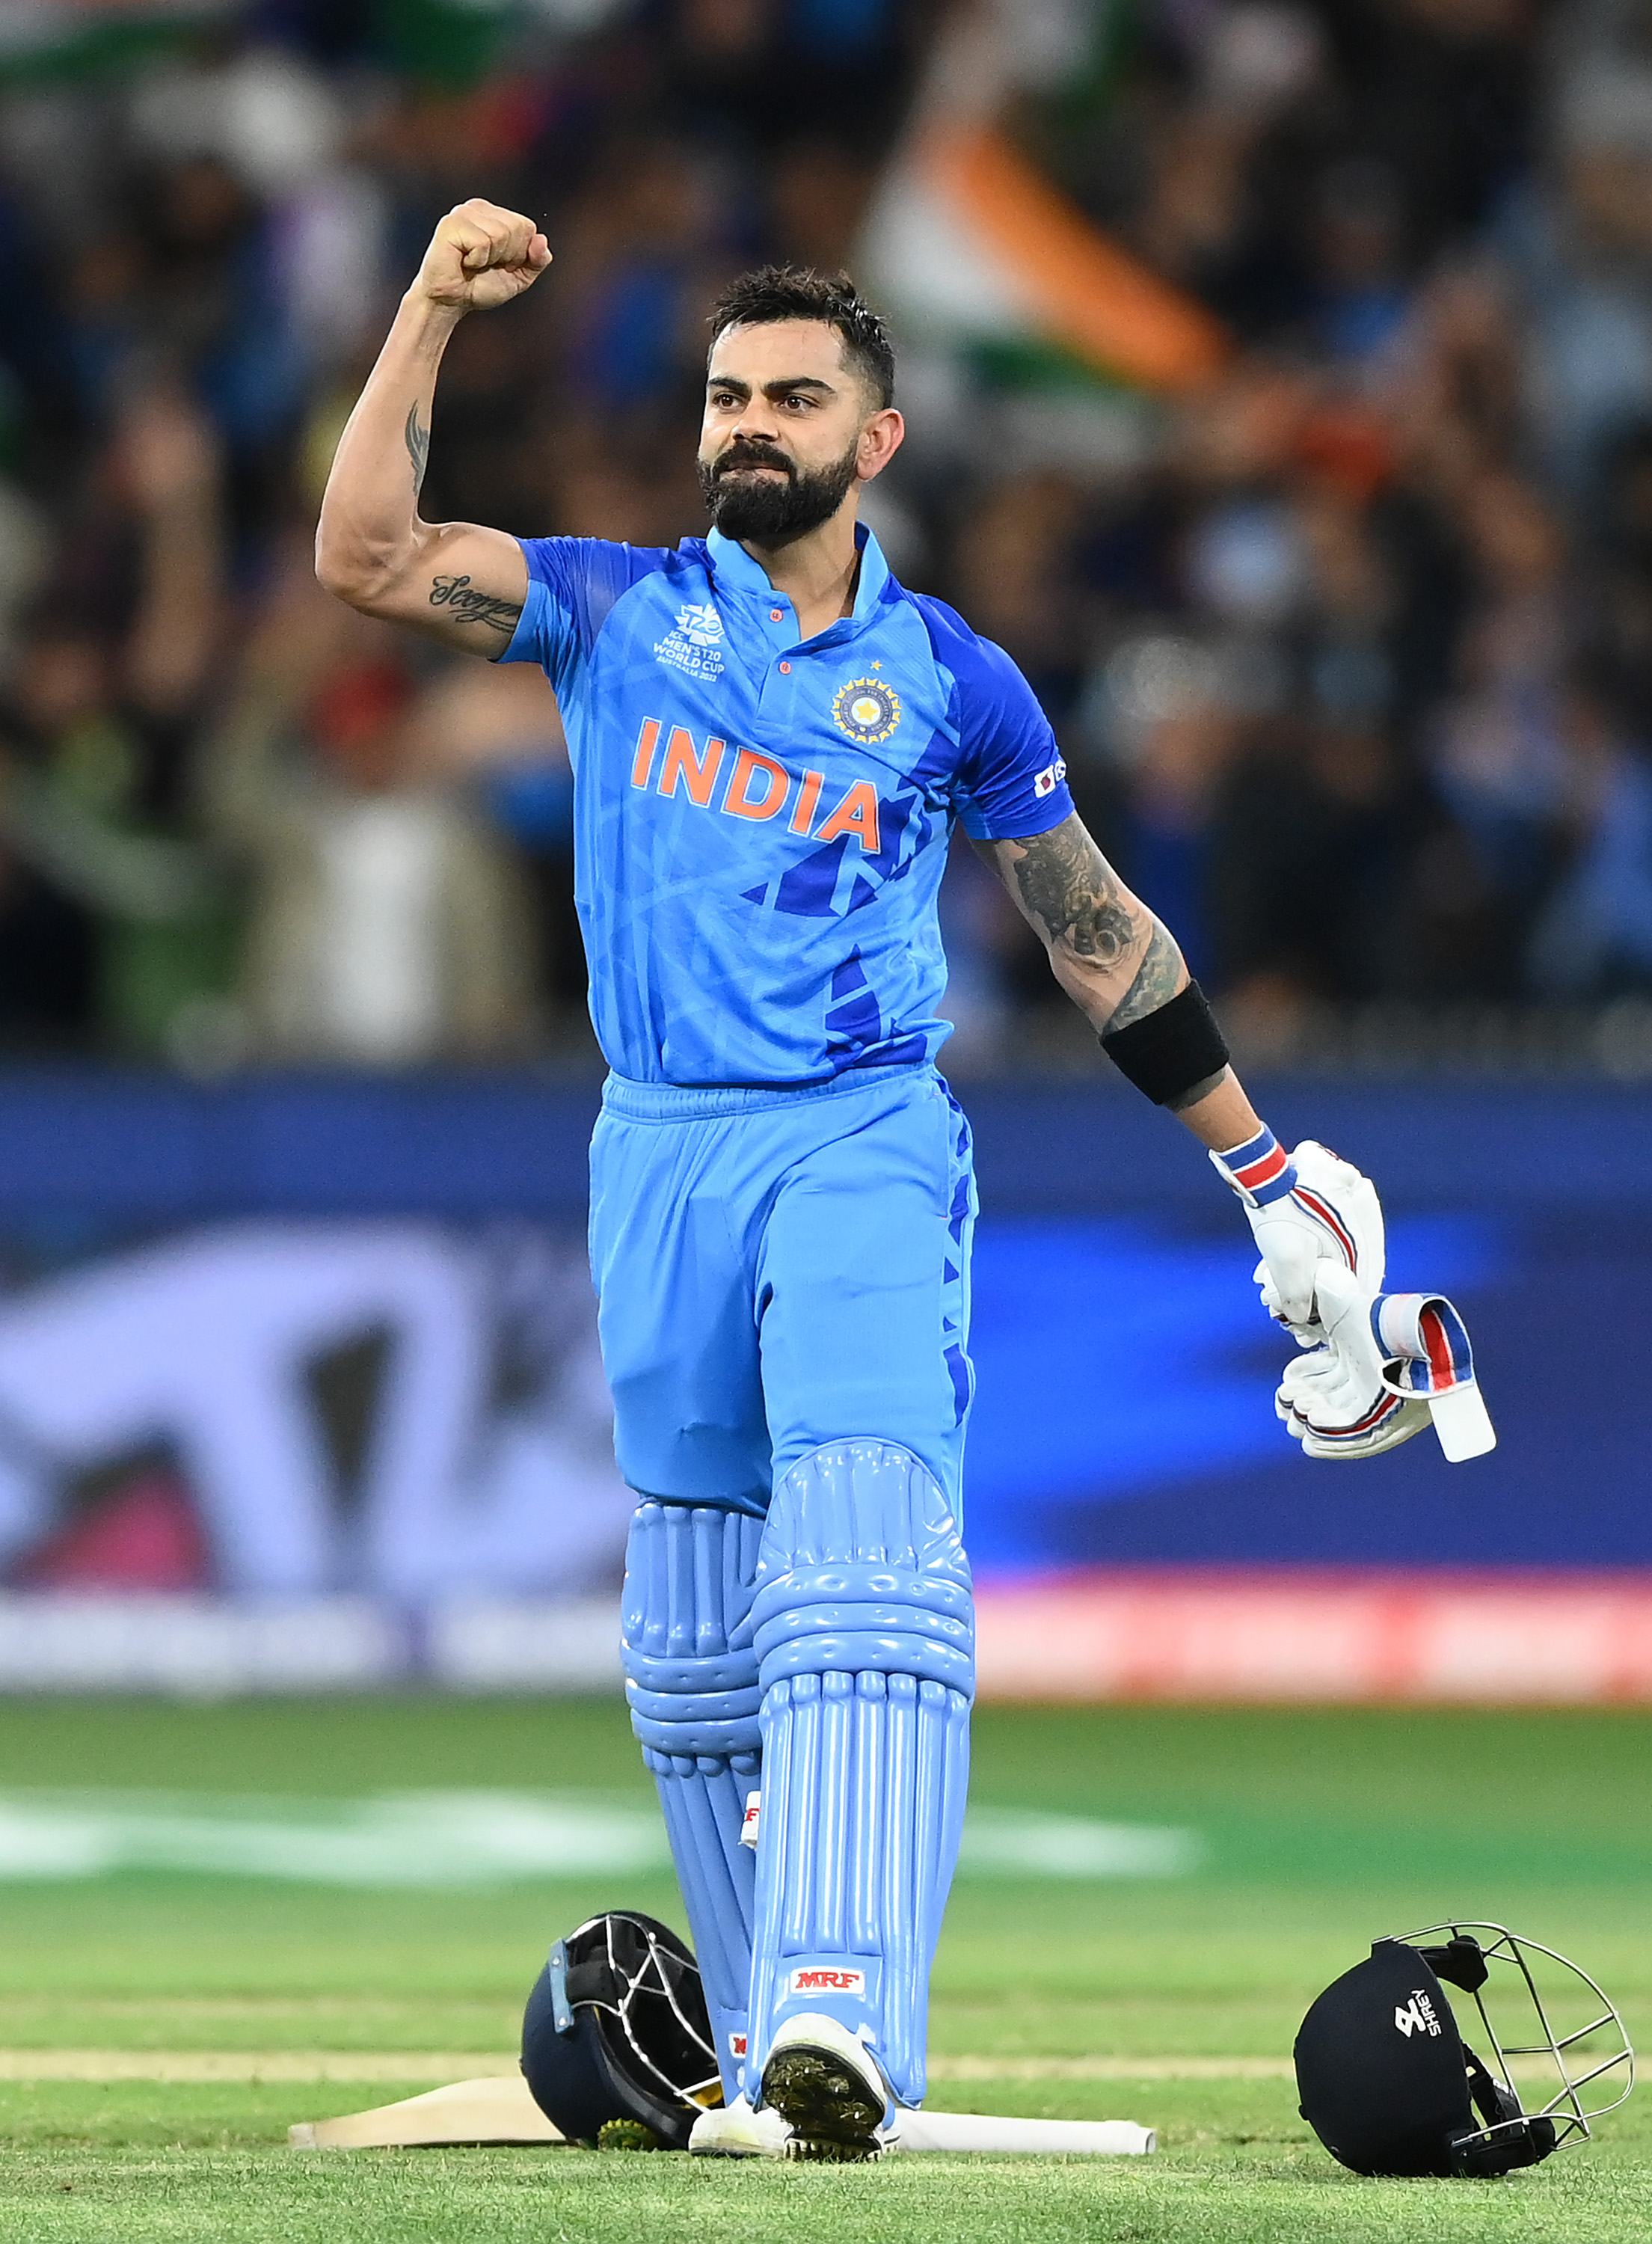 Captains with most runs in international cricket; Here's list featuring Virat Kohli